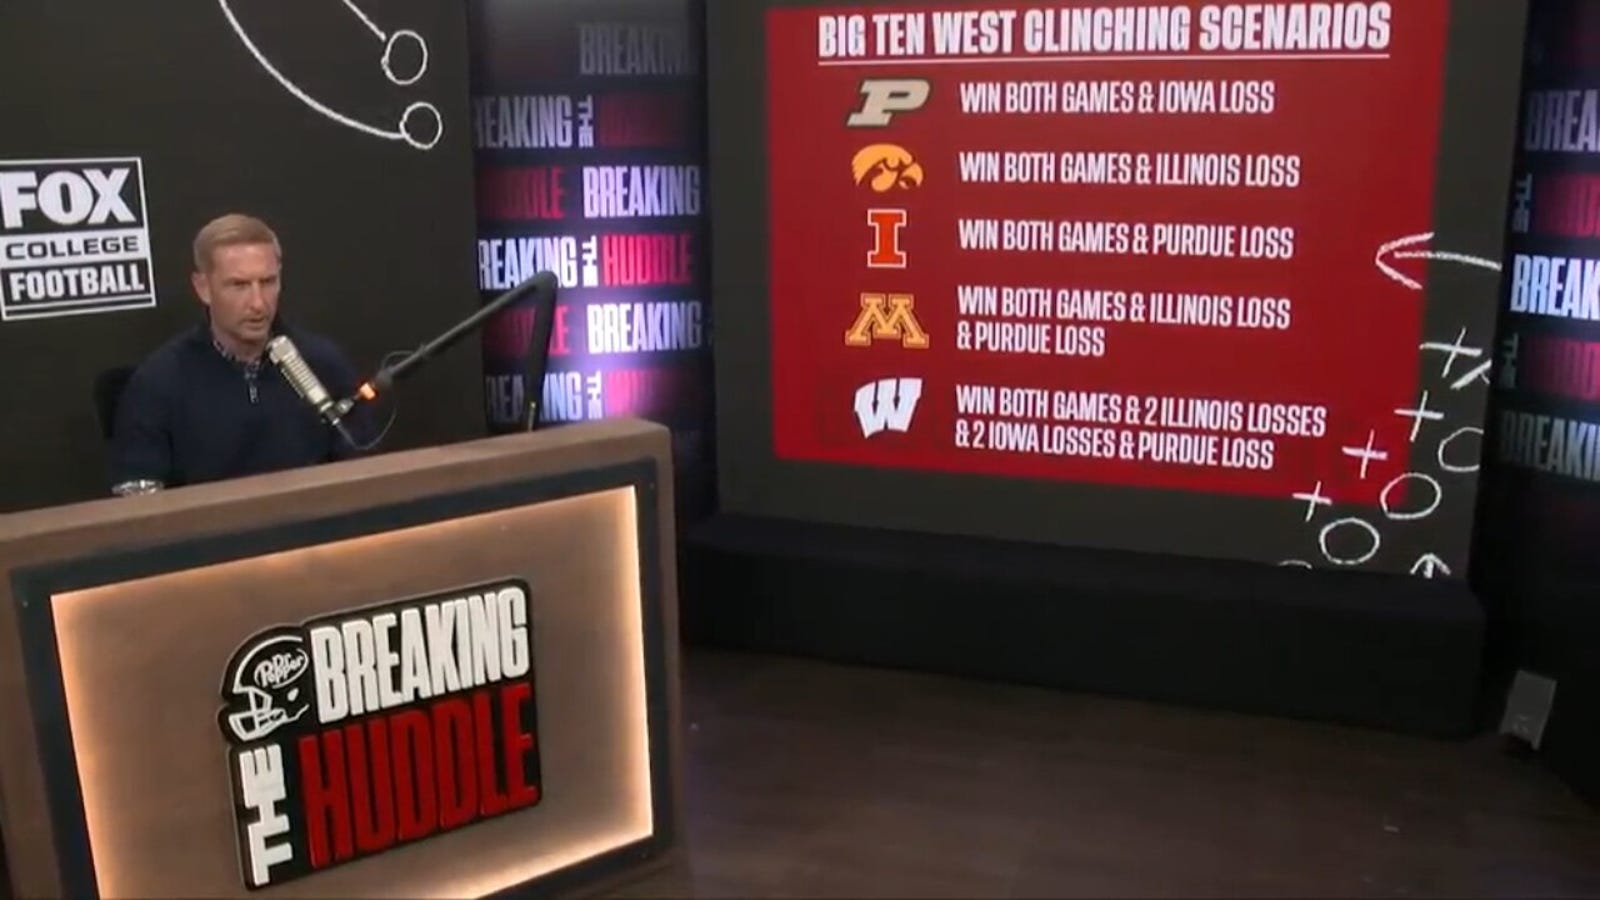 Who will win the Big Ten West?